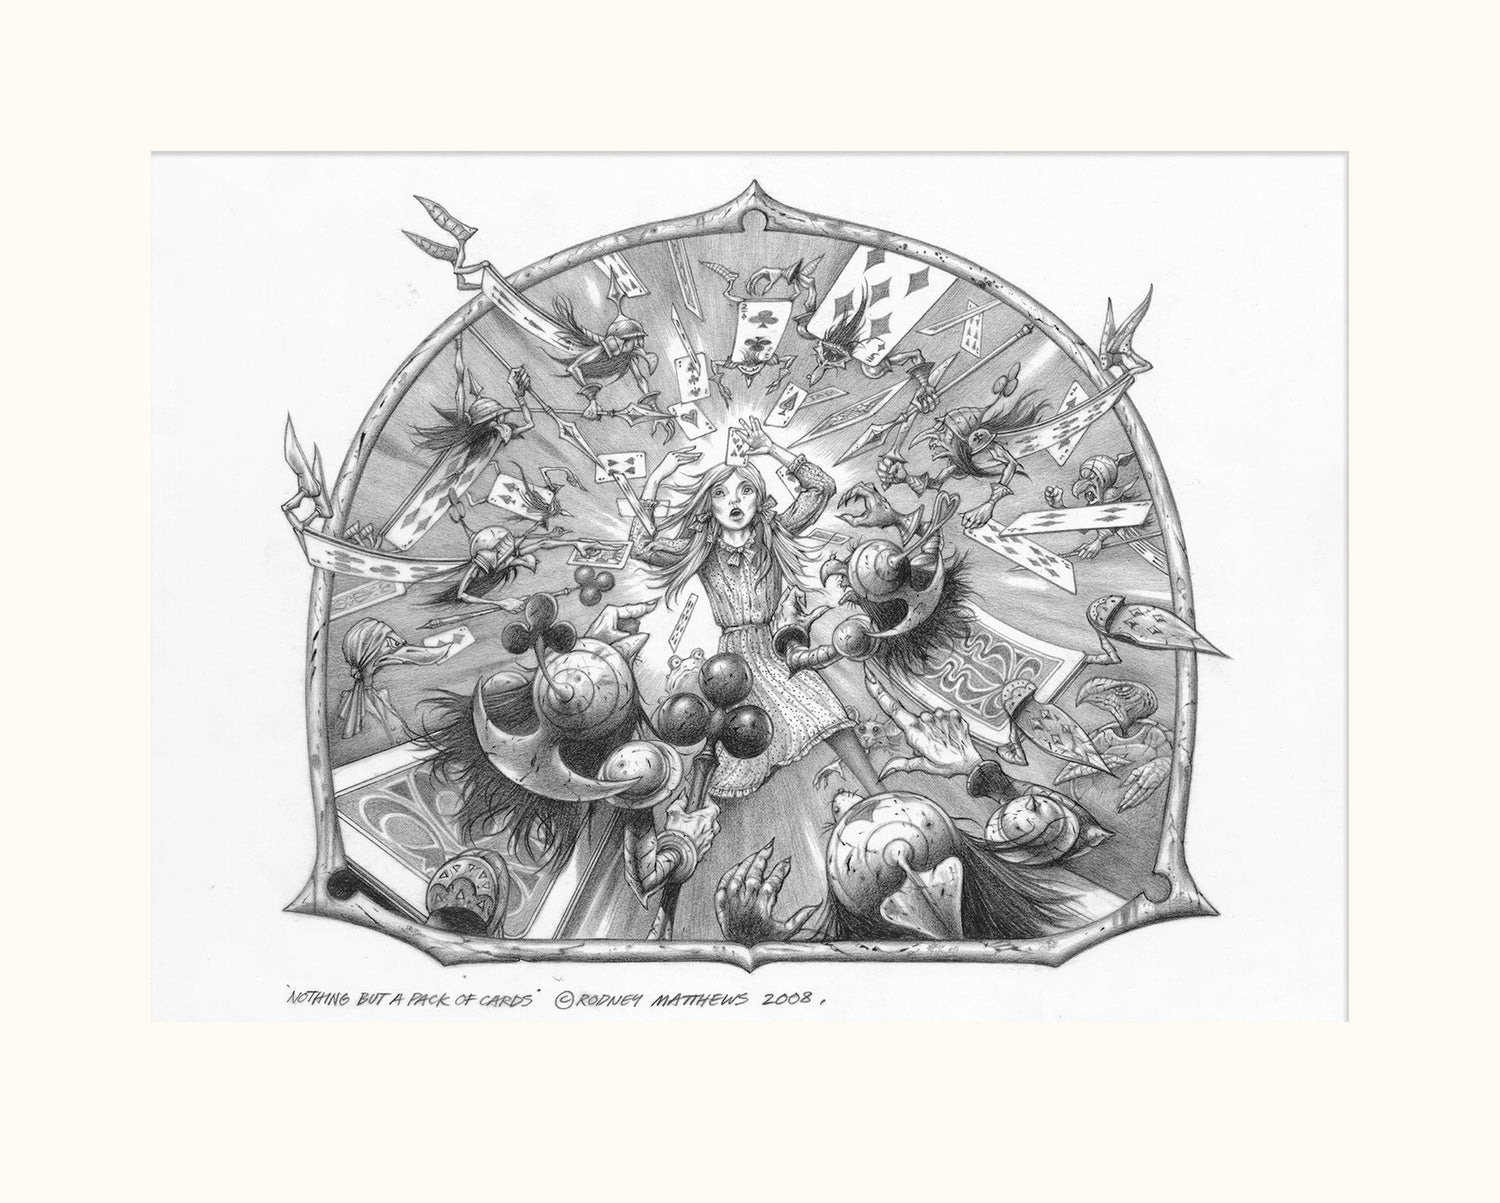 Nothing but a Pack of Cards (Alice in Wonderland) original pencil sketch by Rodney Matthews